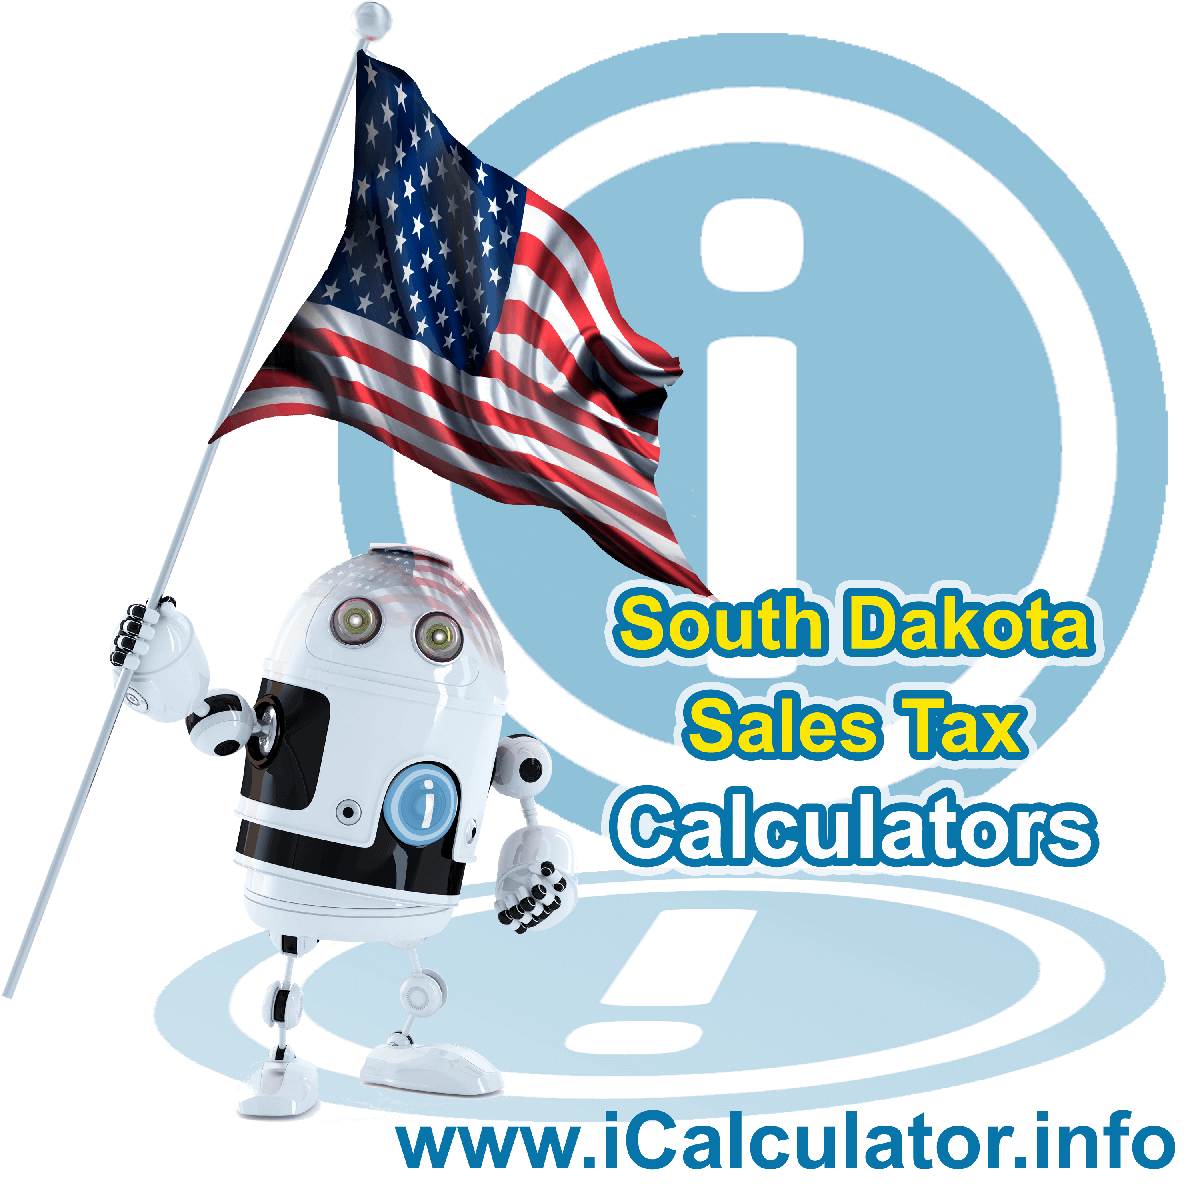 Selby Sales Rates: This image illustrates a calculator robot calculating Selby sales tax manually using the Selby Sales Tax Formula. You can use this information to calculate Selby Sales Tax manually or use the Selby Sales Tax Calculator to calculate sales tax online.